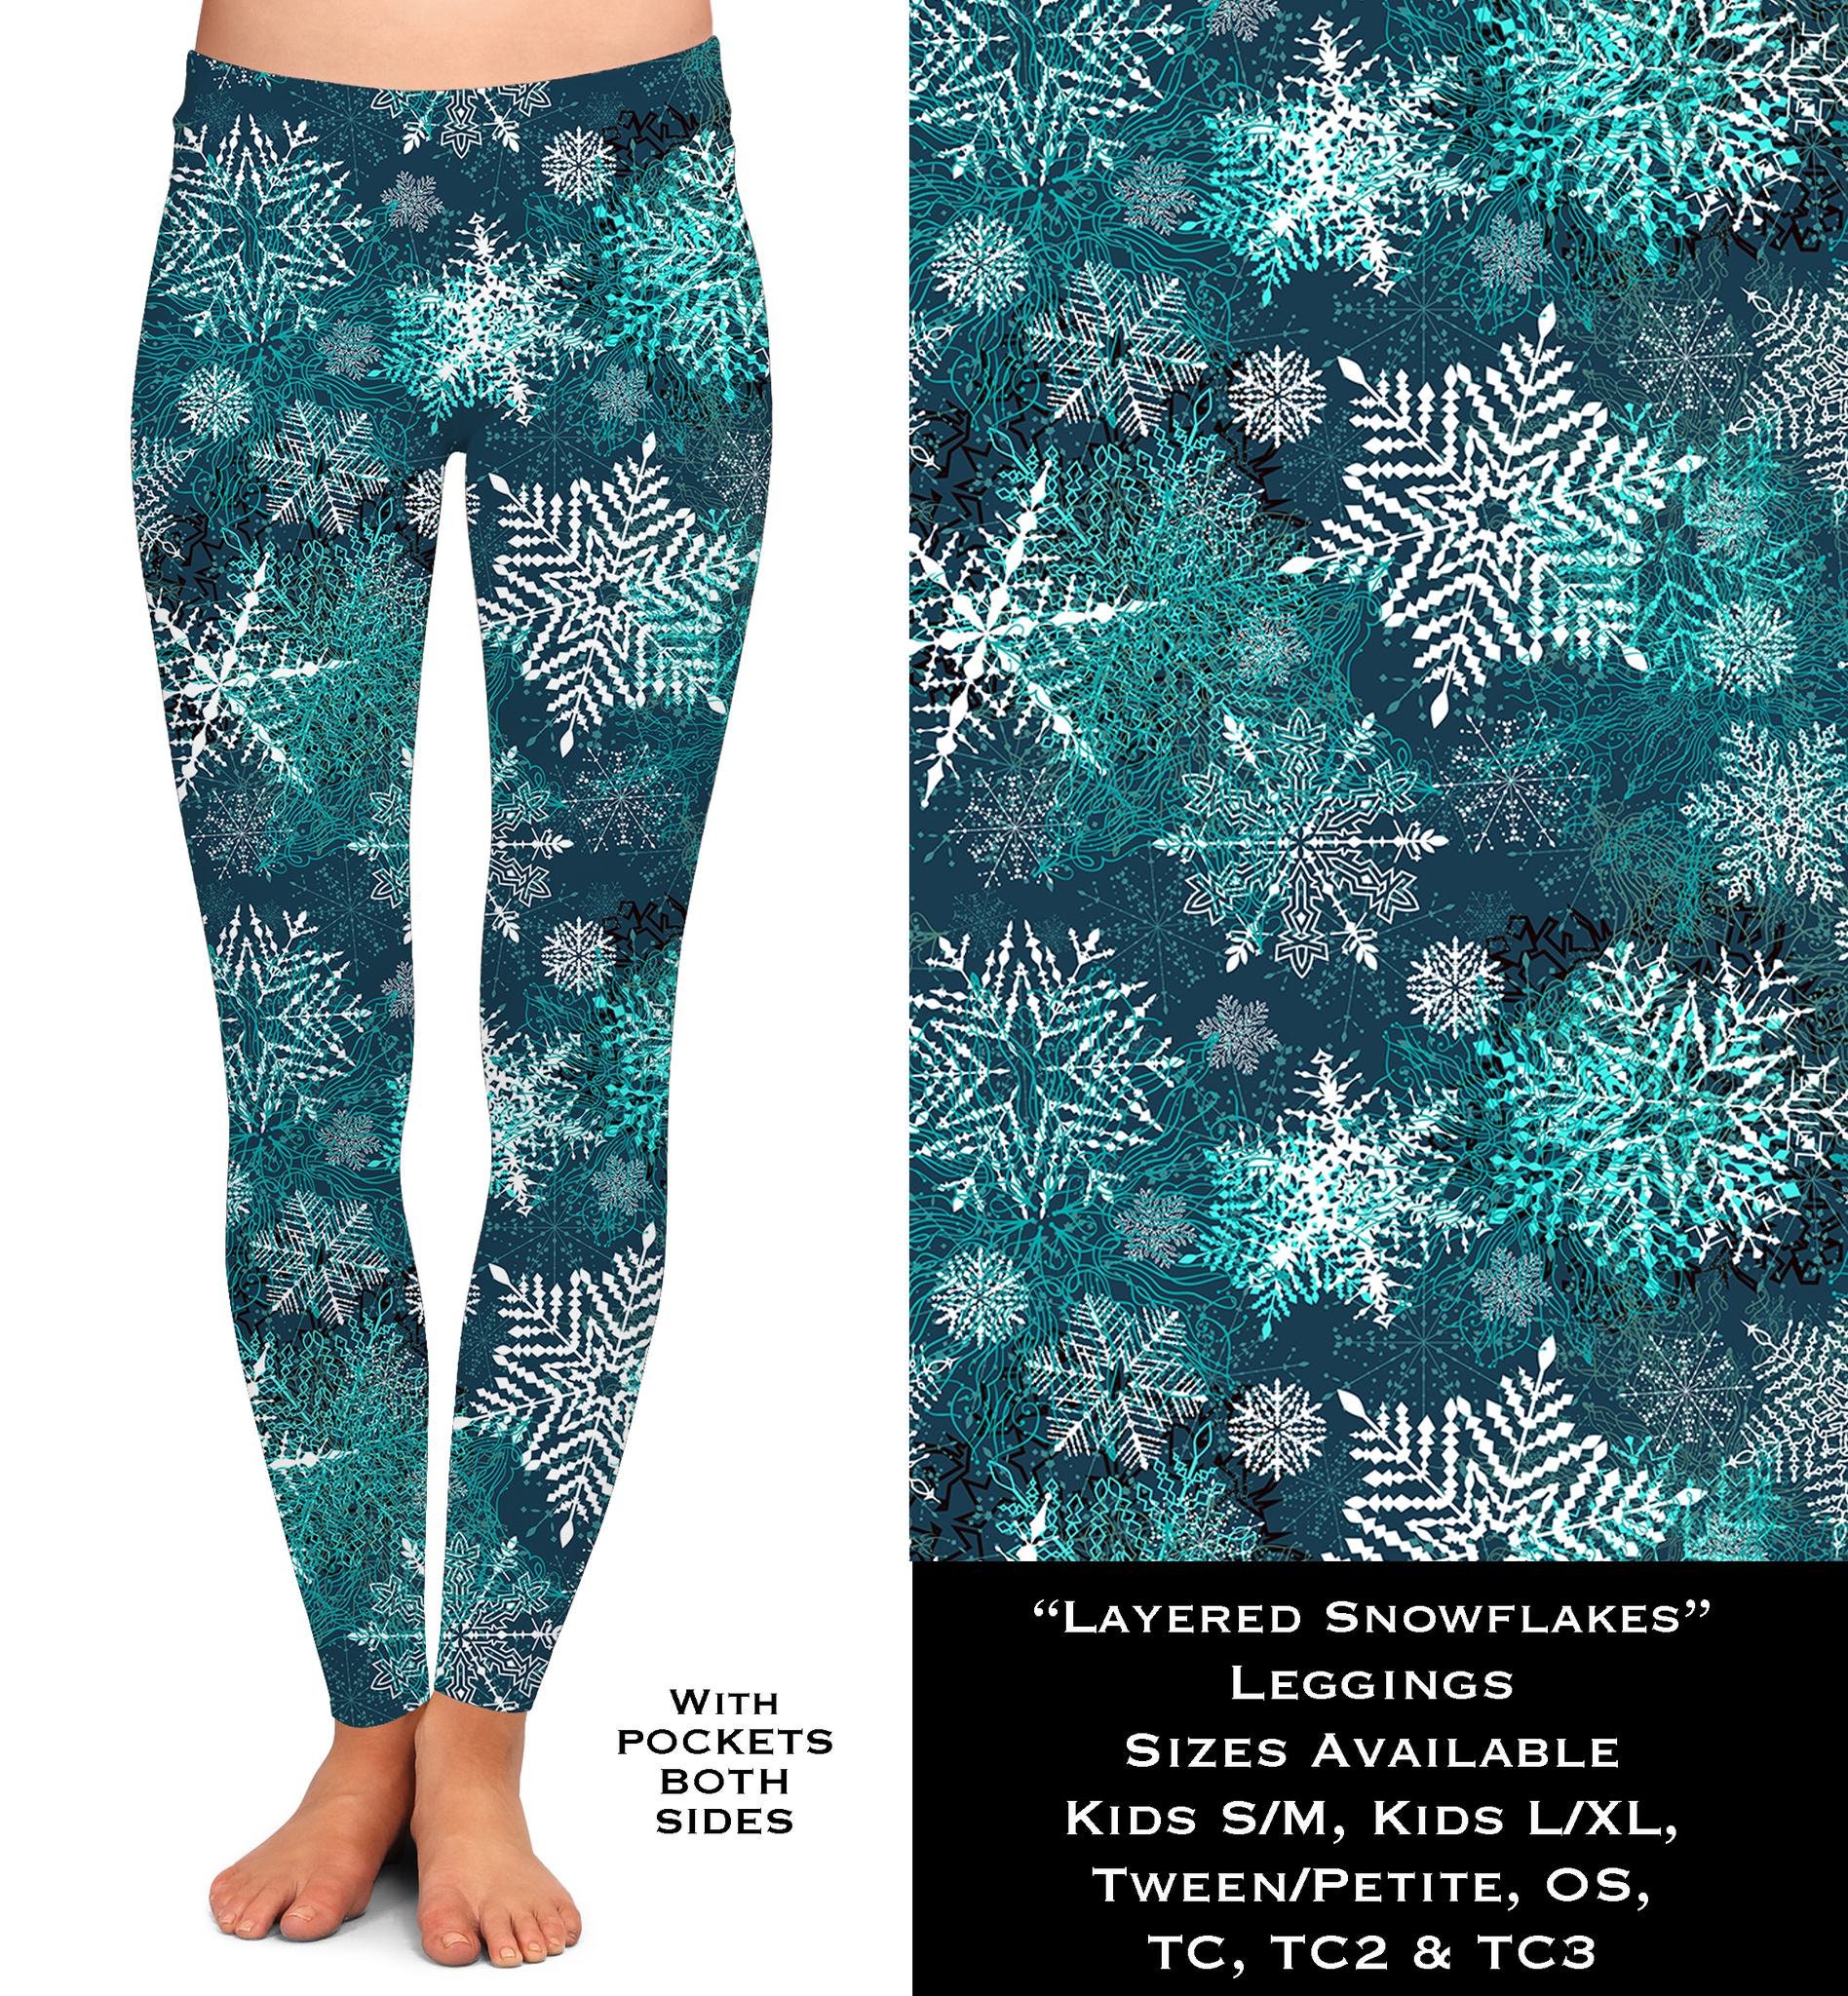 Layered Snowflakes Leggings with Pockets